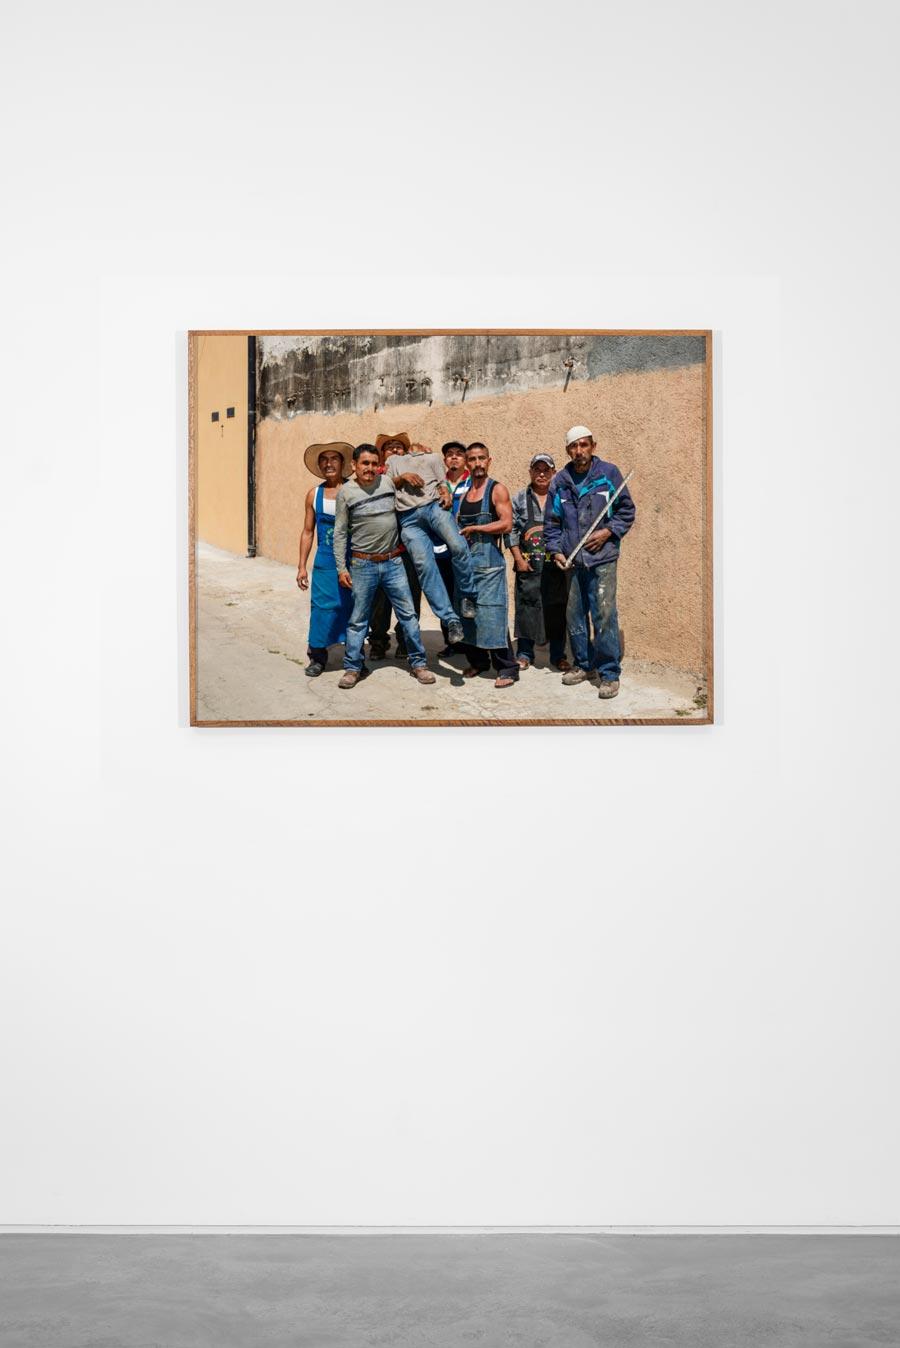 After Siqueiros, Oaxaca de Juárez, 2018 - Pieter Hugo (Colour Photography)
Signed on reverse
Archival pigment print

Available in two sizes:
35 1/2 x 47 inches, edition of 7 + 2 APs
47 x 63 inches, edition of 7 + 2 APs

Pieter Hugo (born 1976) is a